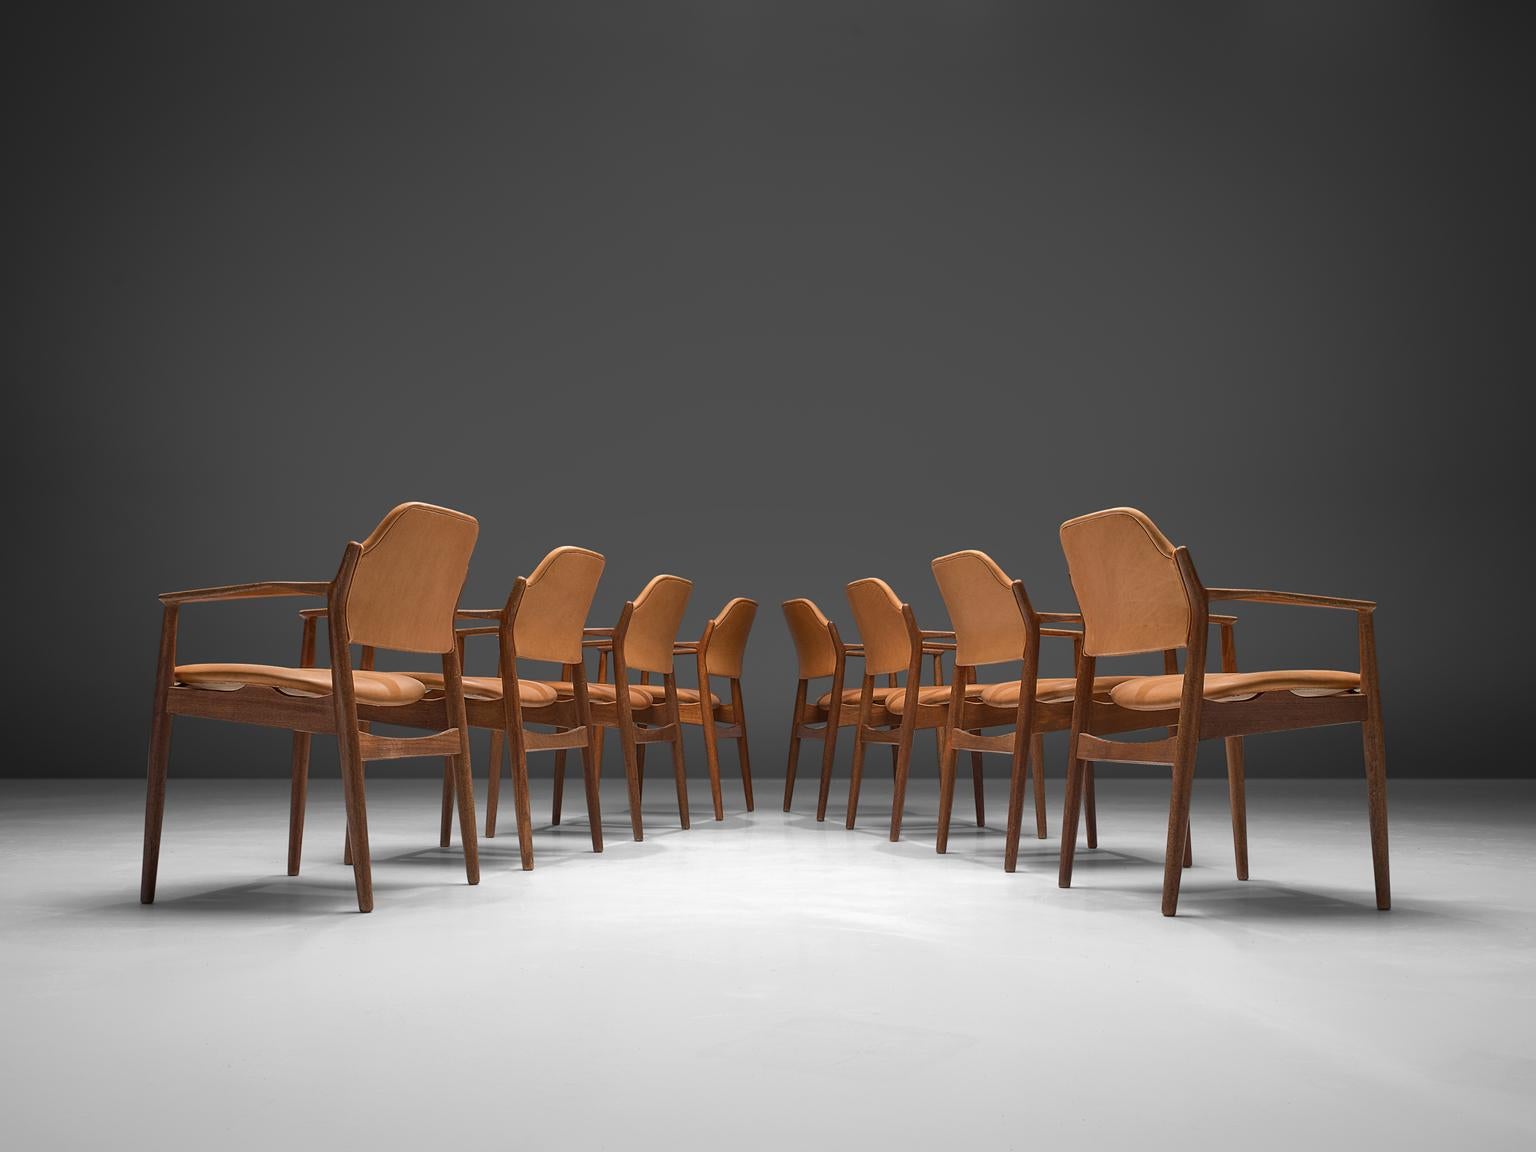 Arne Vodder for Sibast, set of 8 reupholstered dining chairs model 62A, rosewood and cognac leather, Denmark, 1960s.

This classic set of eight chairs is executed in leather and rosewood and designed by the Danish designer Arne Vodder. These